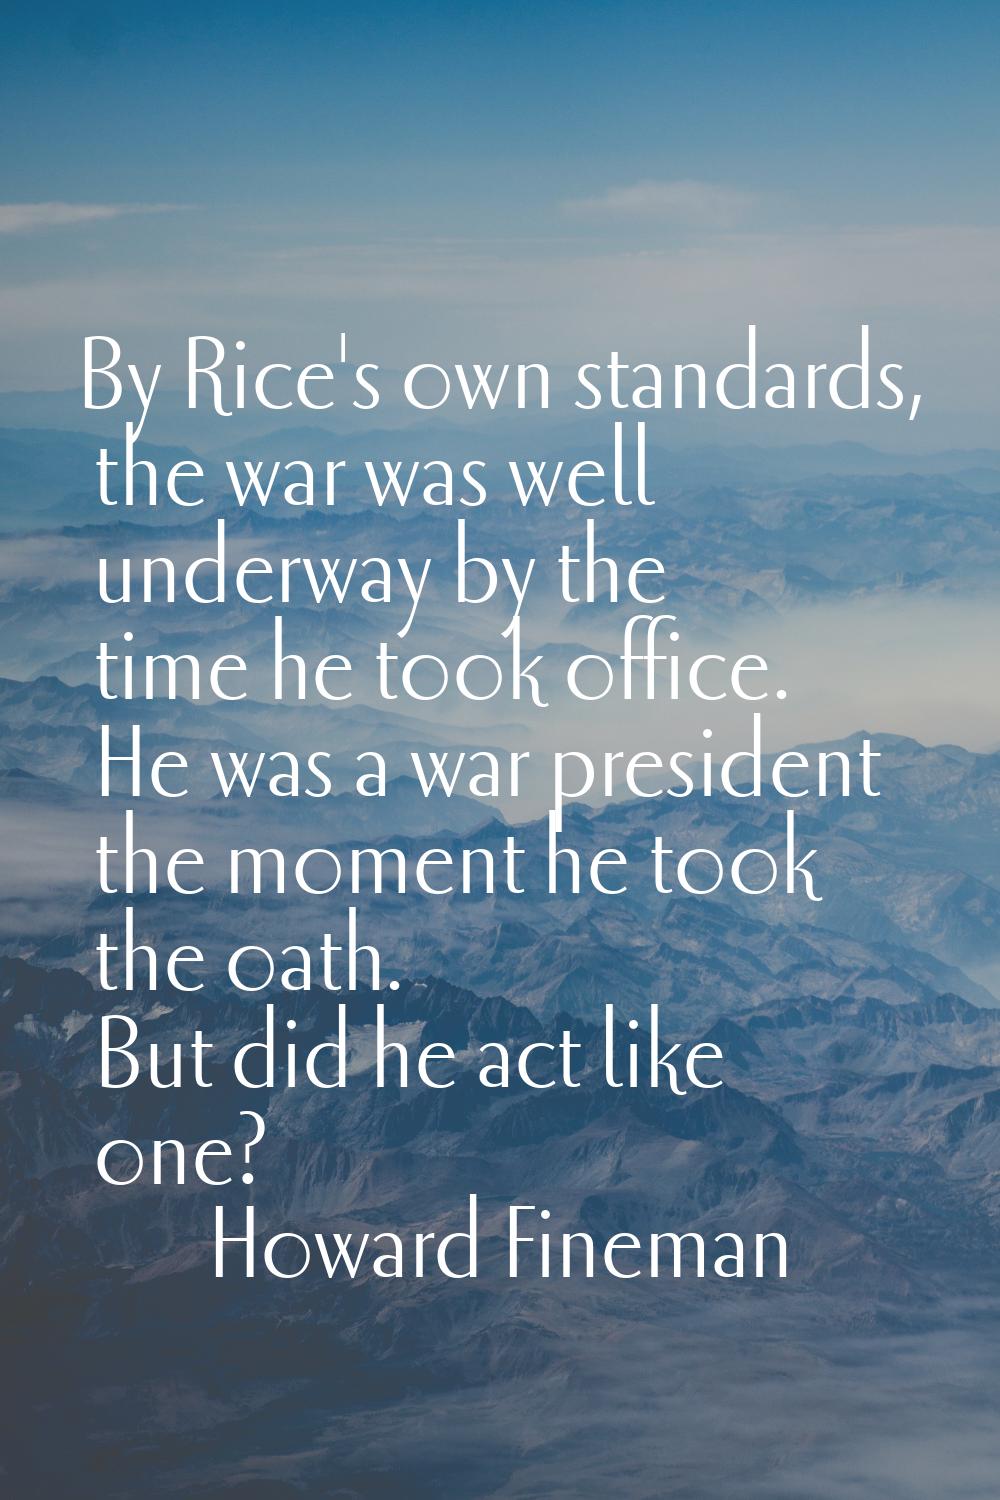 By Rice's own standards, the war was well underway by the time he took office. He was a war preside